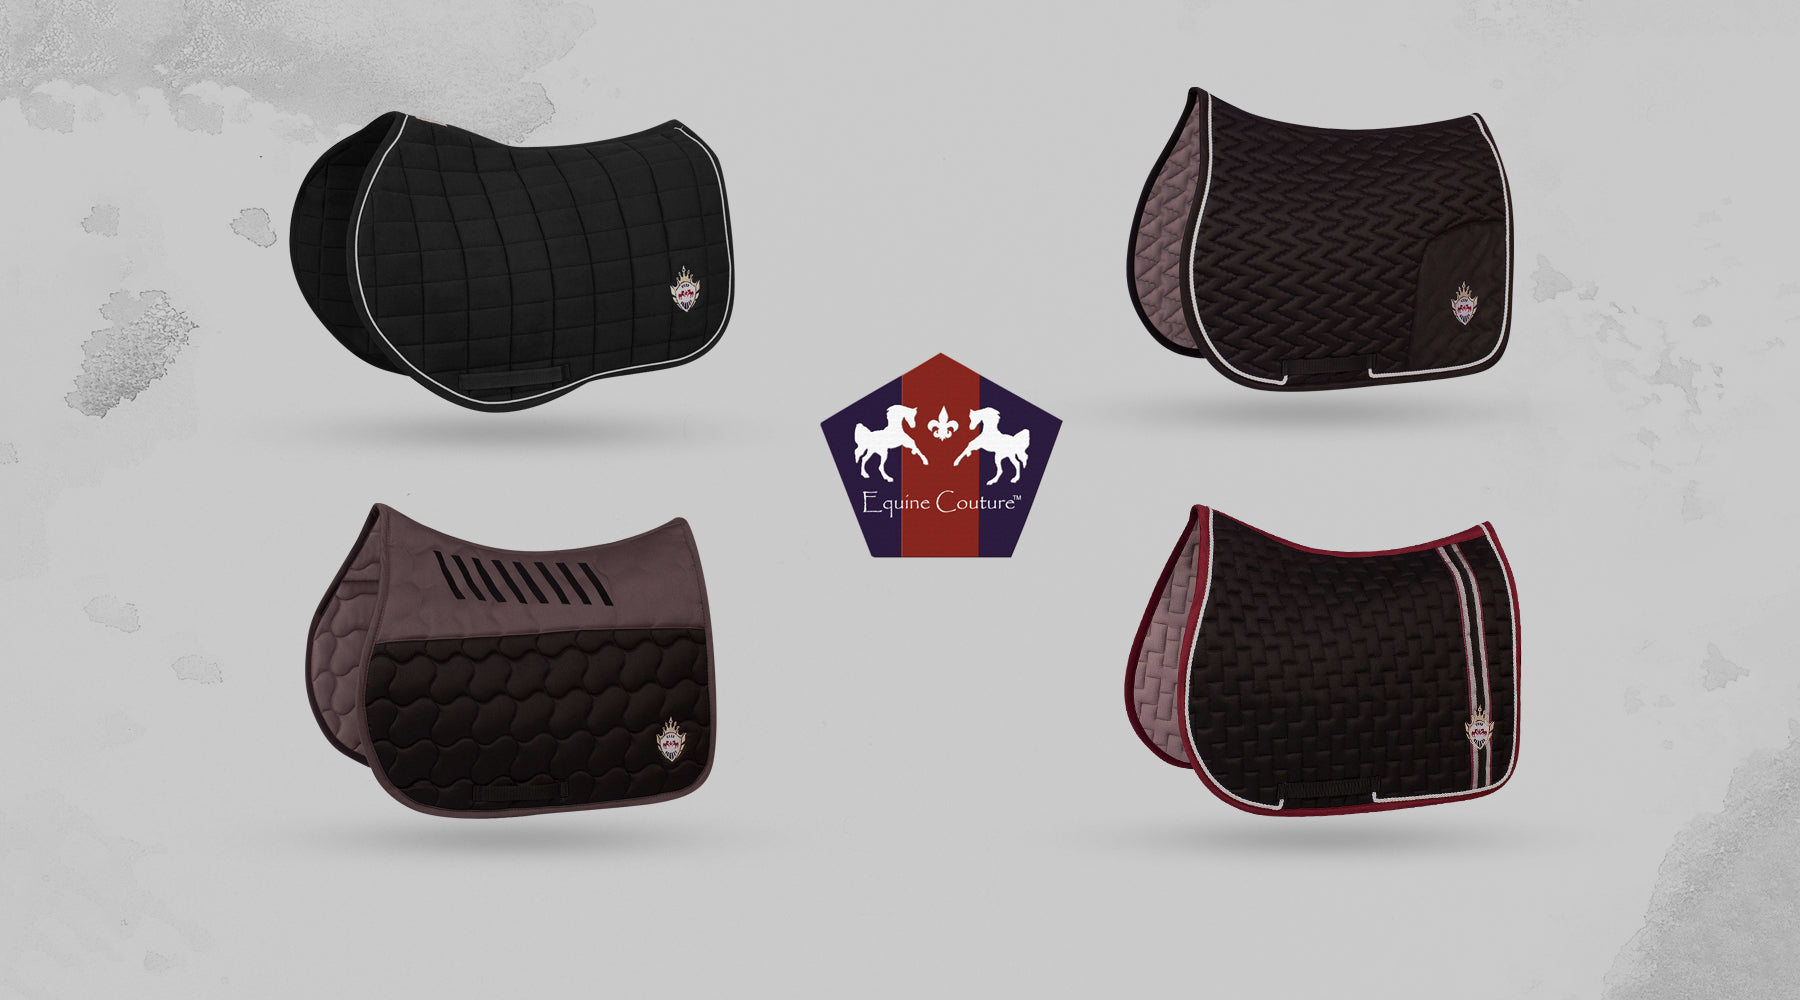 Equine couture saddle pads